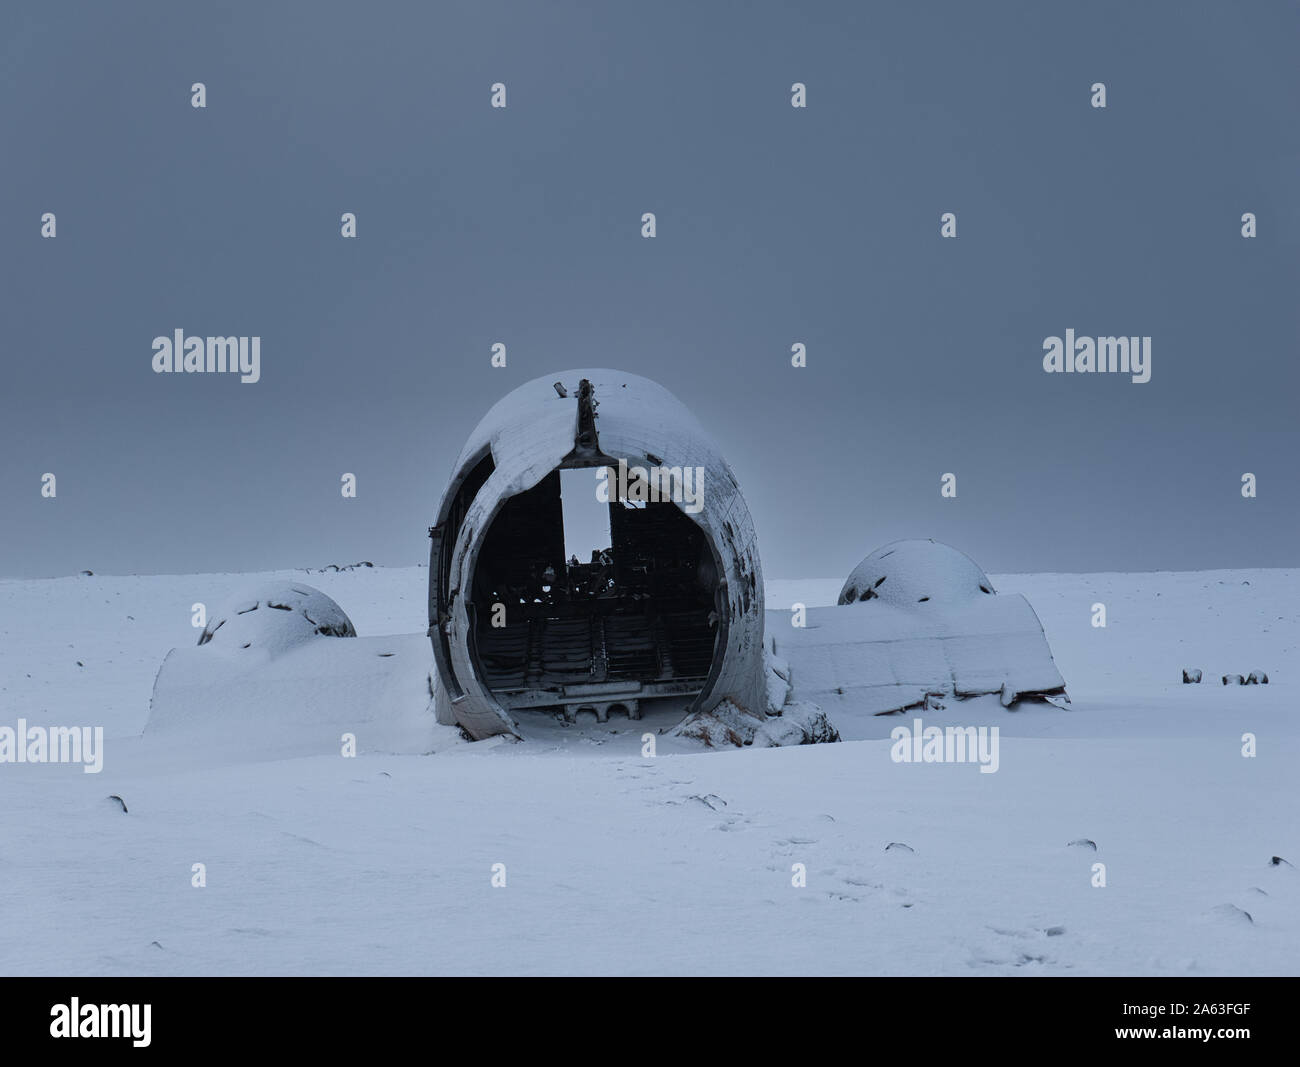 The tail of the plane wreck in Iceland in winter with fresh snow Stock Photo